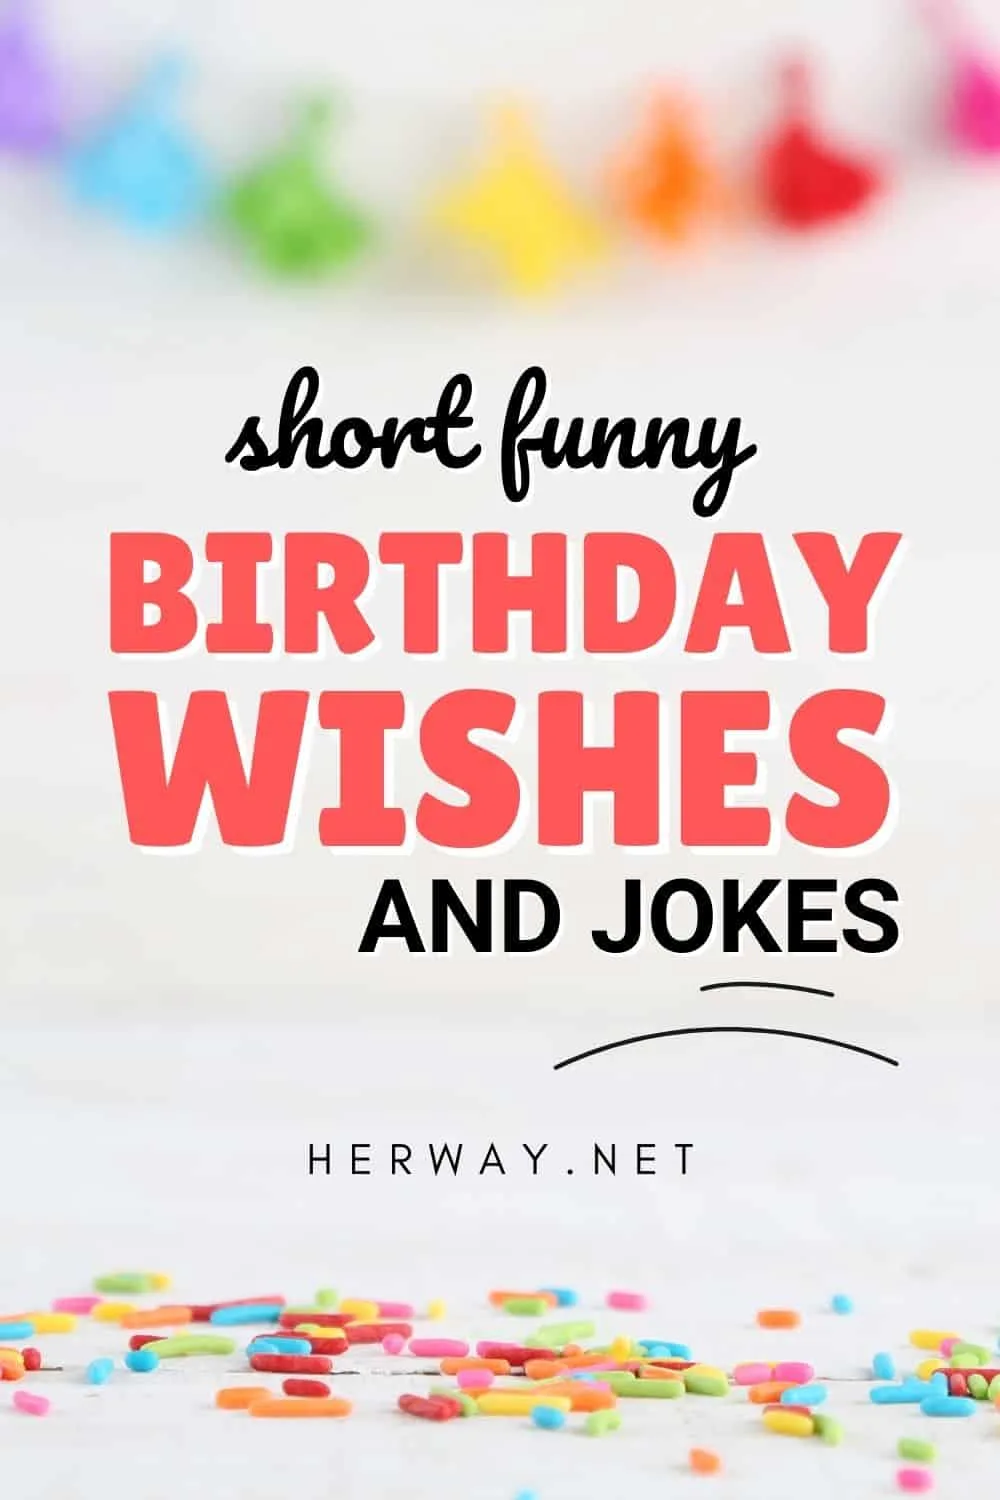 50 Funny Birthday Wishes for Your Wife to Make Her Laugh - Happy Birthday  Wisher